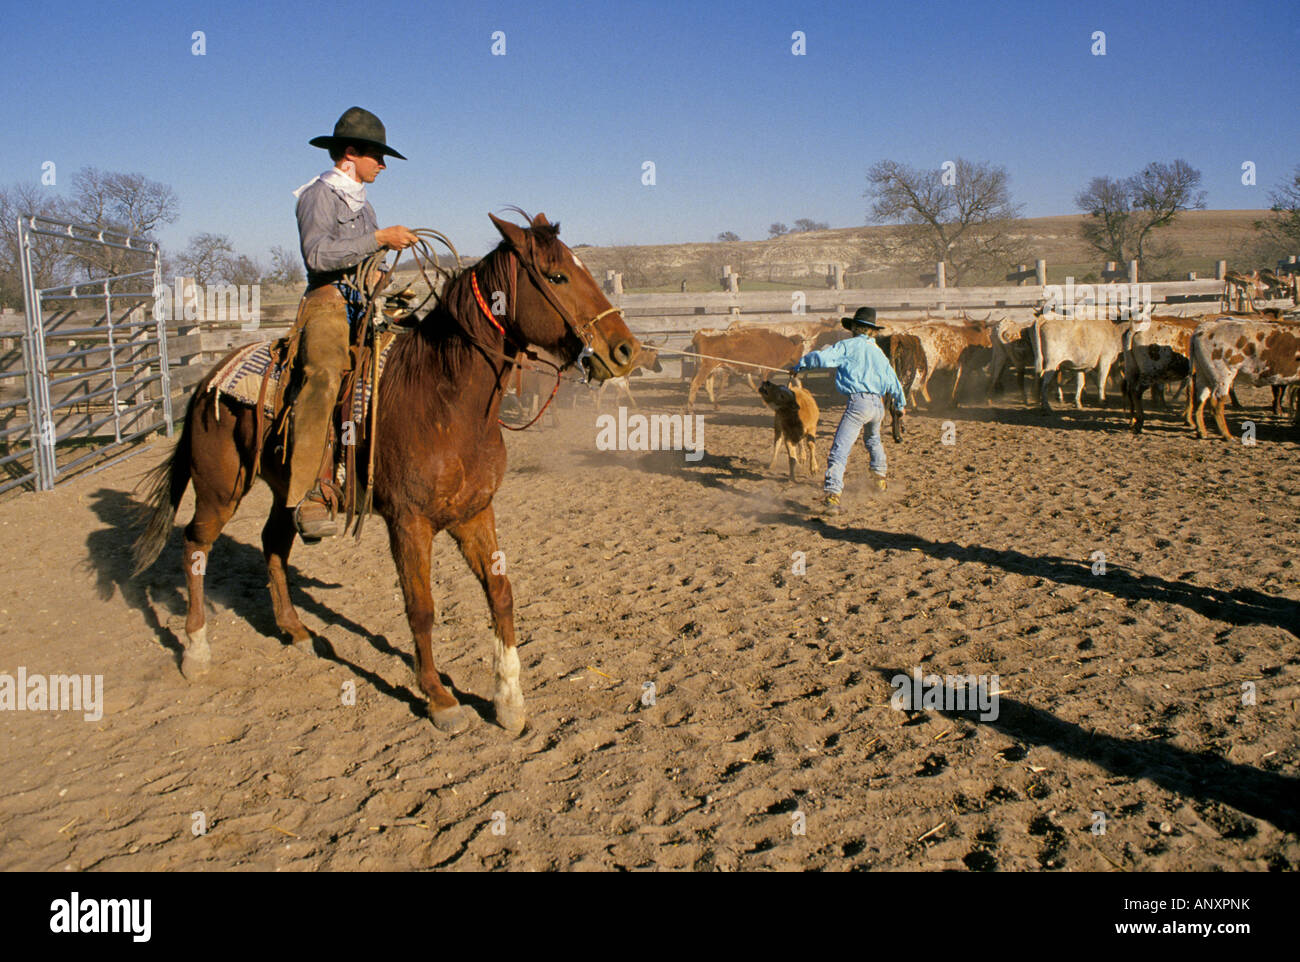 Portrait of a cowboy with a lariat or riata roping a calf on a cattle ranch near Fort Worth Texas Stock Photo